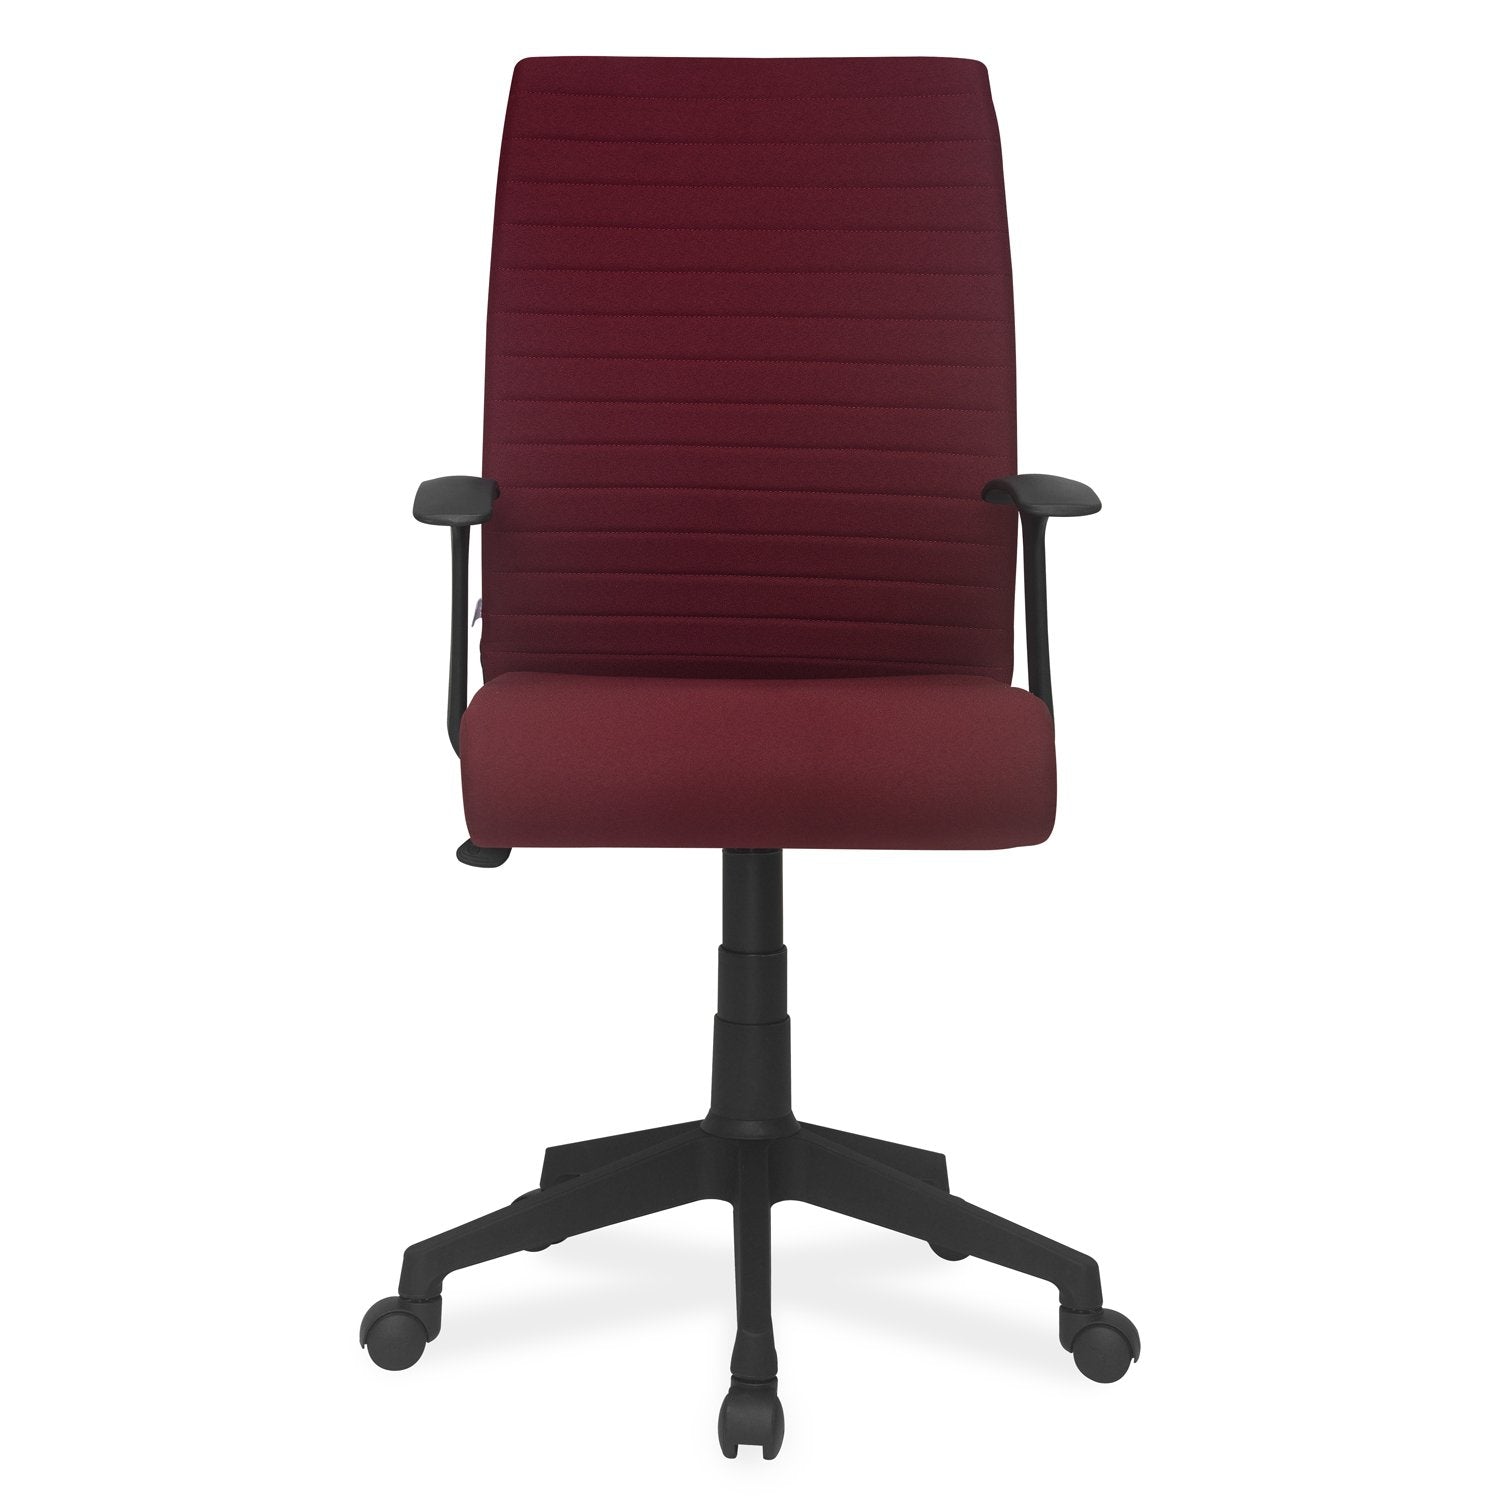 Thames Mid Back Chair (Maroon)